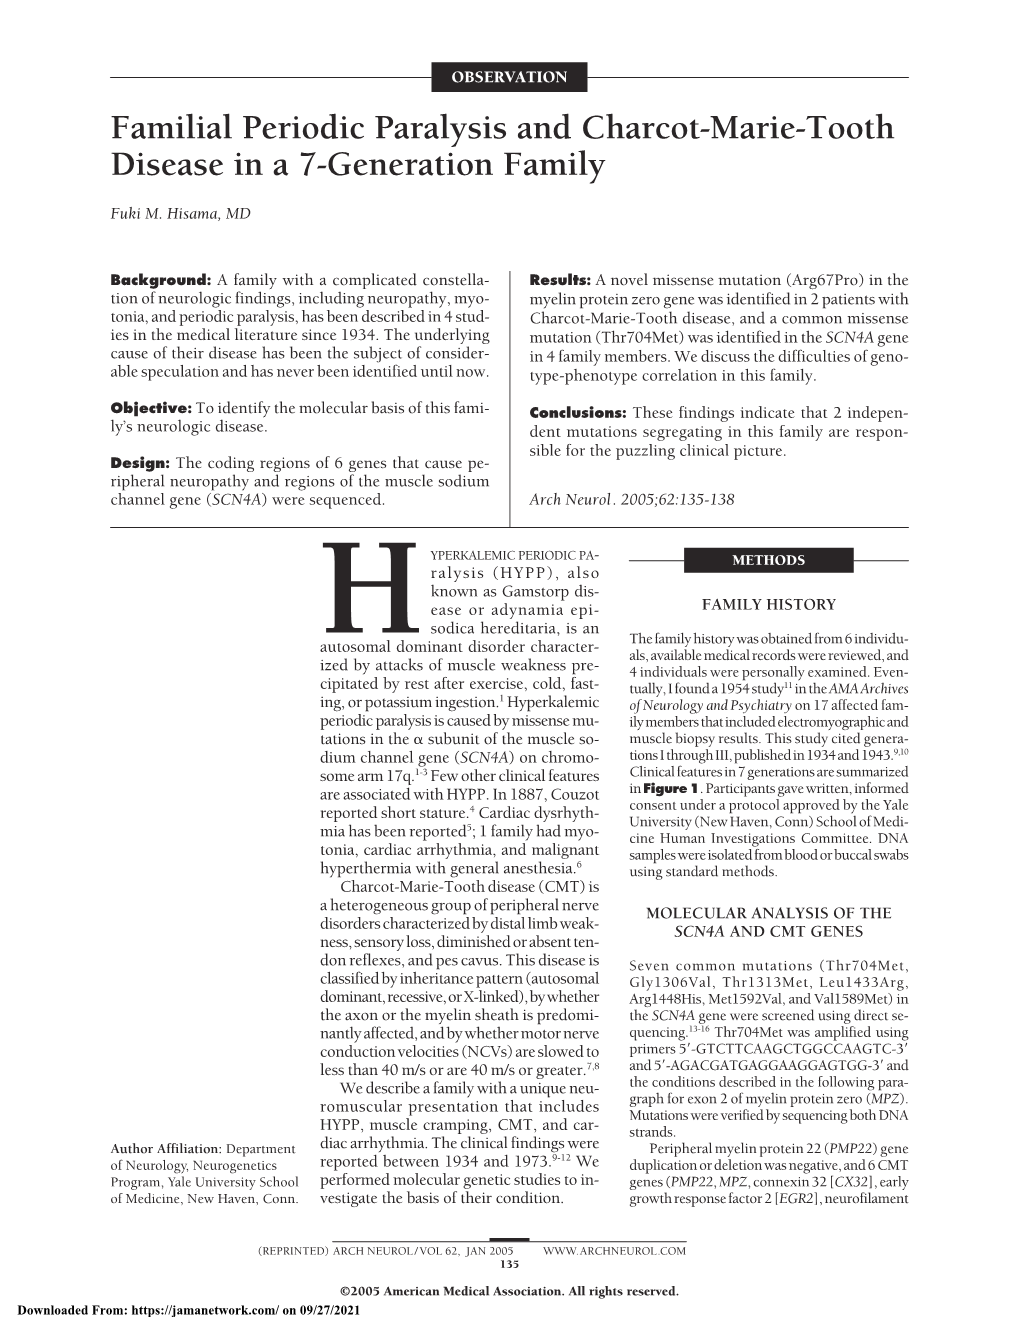 Familial Periodic Paralysis and Charcot-Marie-Tooth Disease in a 7-Generation Family